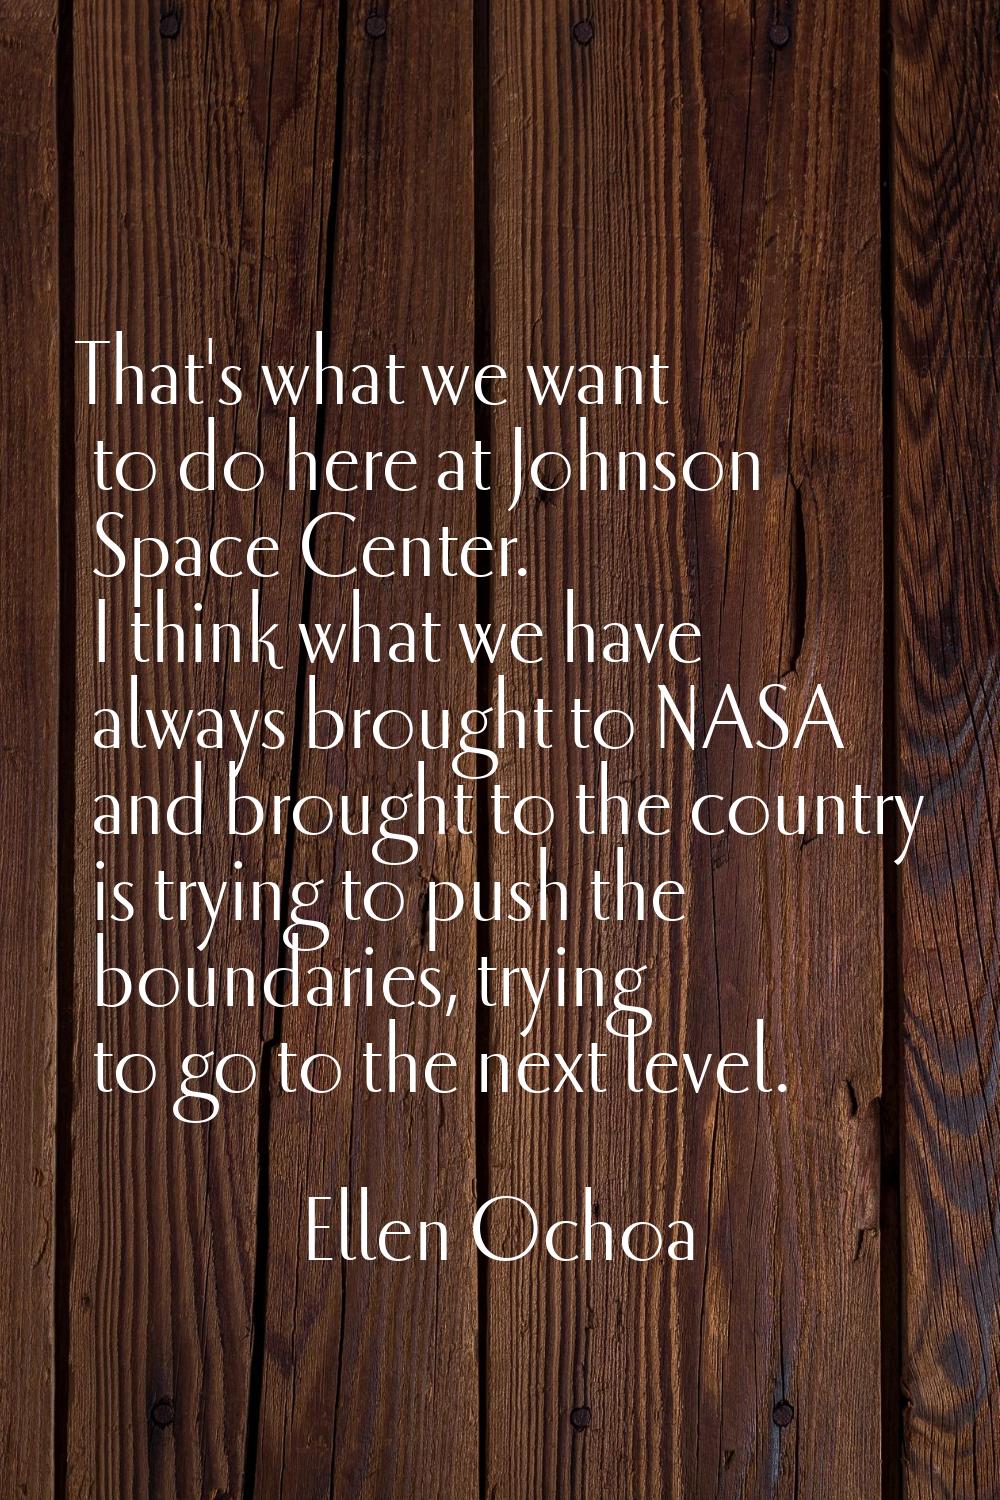 That's what we want to do here at Johnson Space Center. I think what we have always brought to NASA